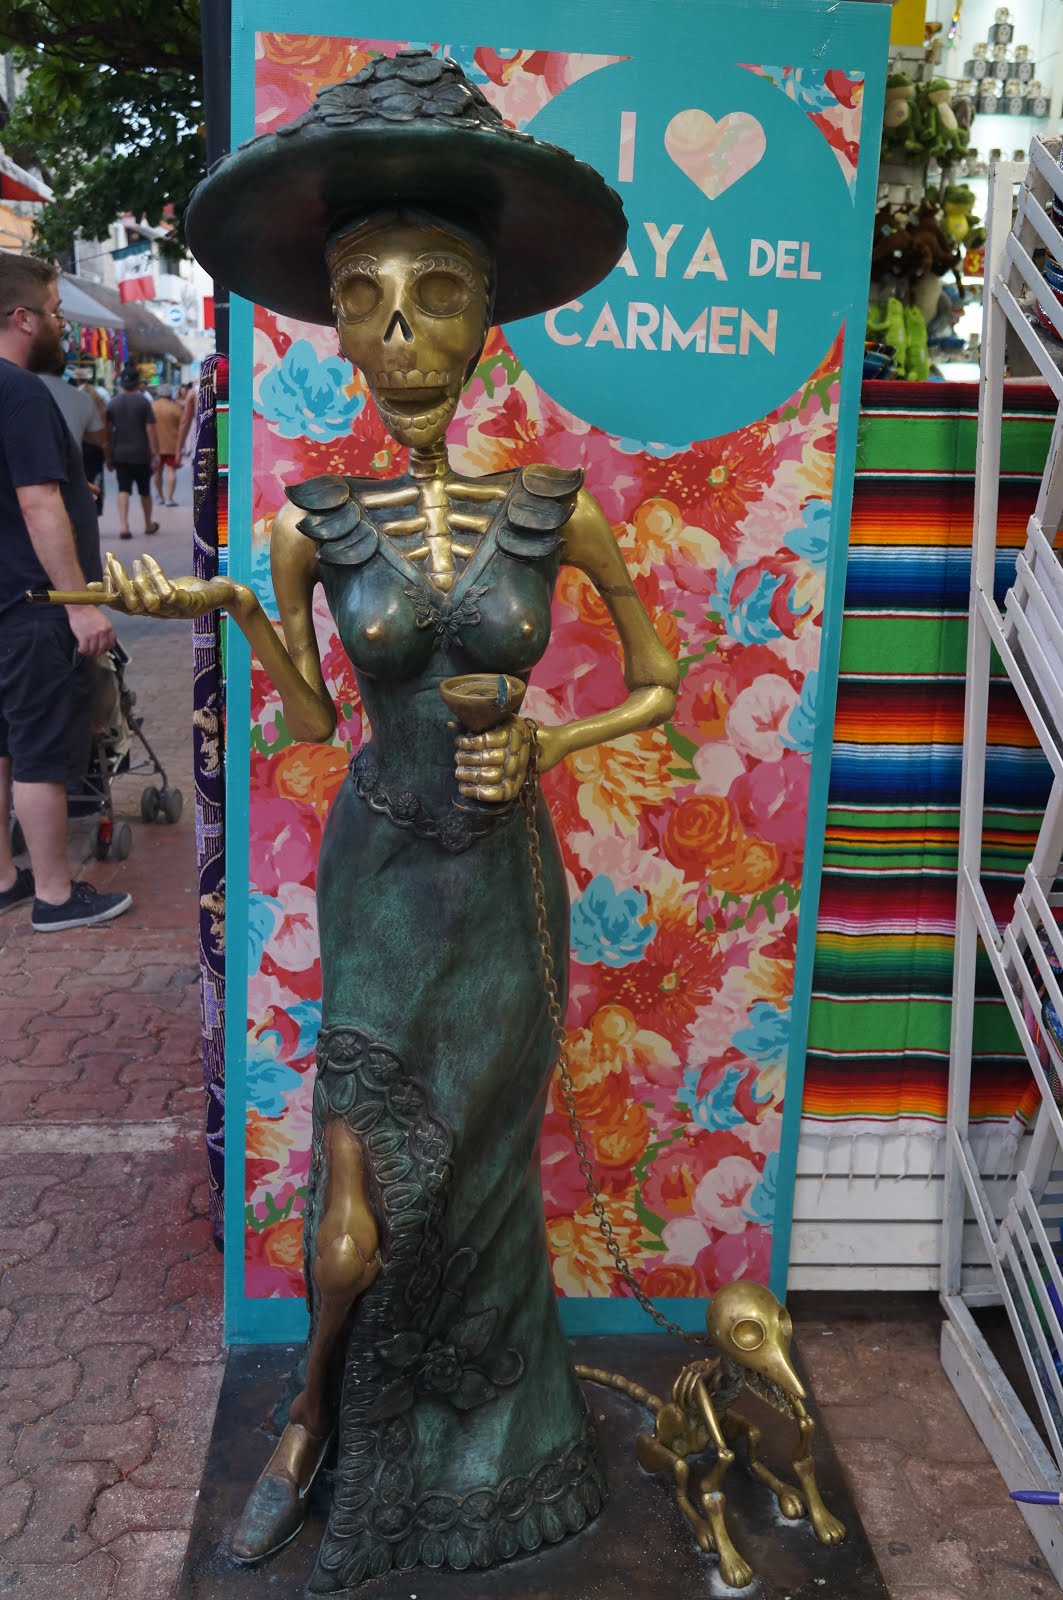 One of the famous singers visiting Playa del Carmen